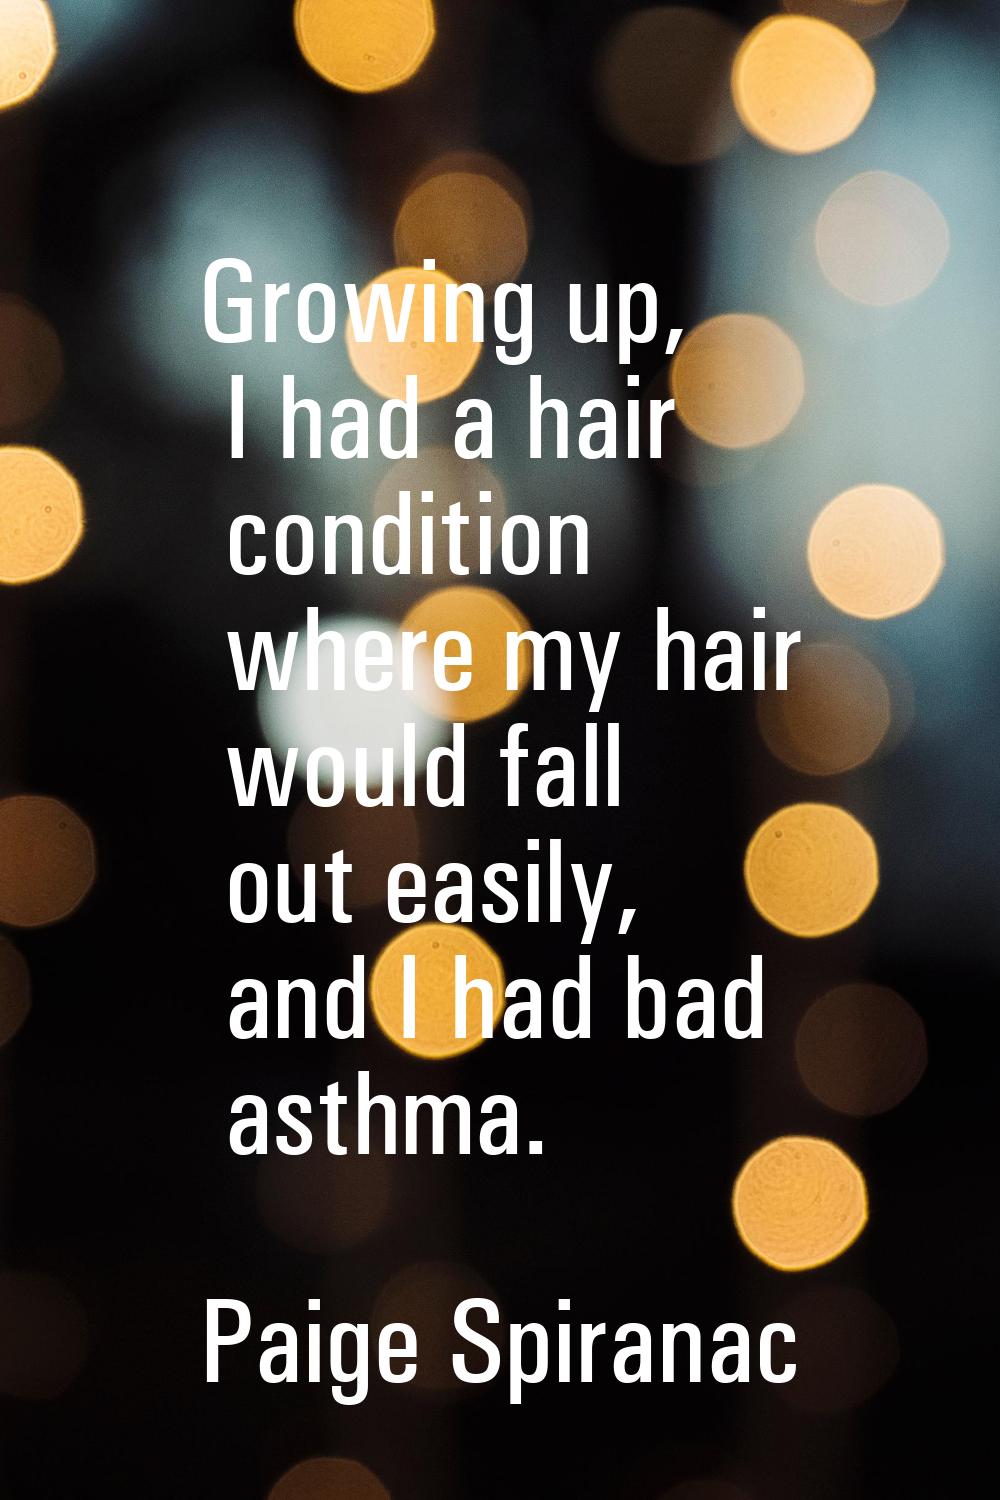 Growing up, I had a hair condition where my hair would fall out easily, and I had bad asthma.